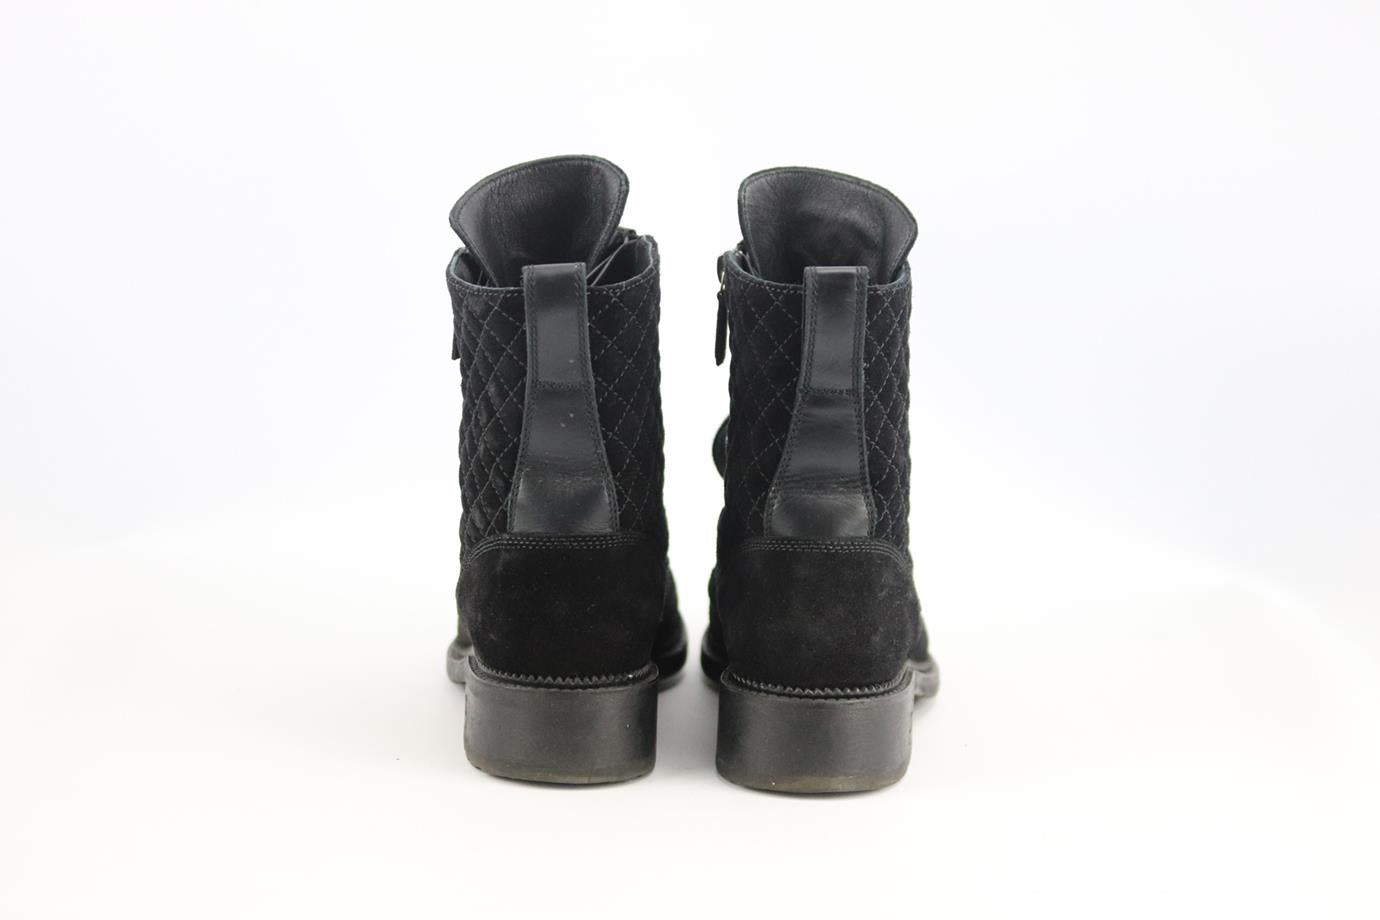 CHANEL CC DETAILED QUILTED SUEDE AND LEATHER COMBAT BOOTS EU 38.5 UK 5.5 US 8.5